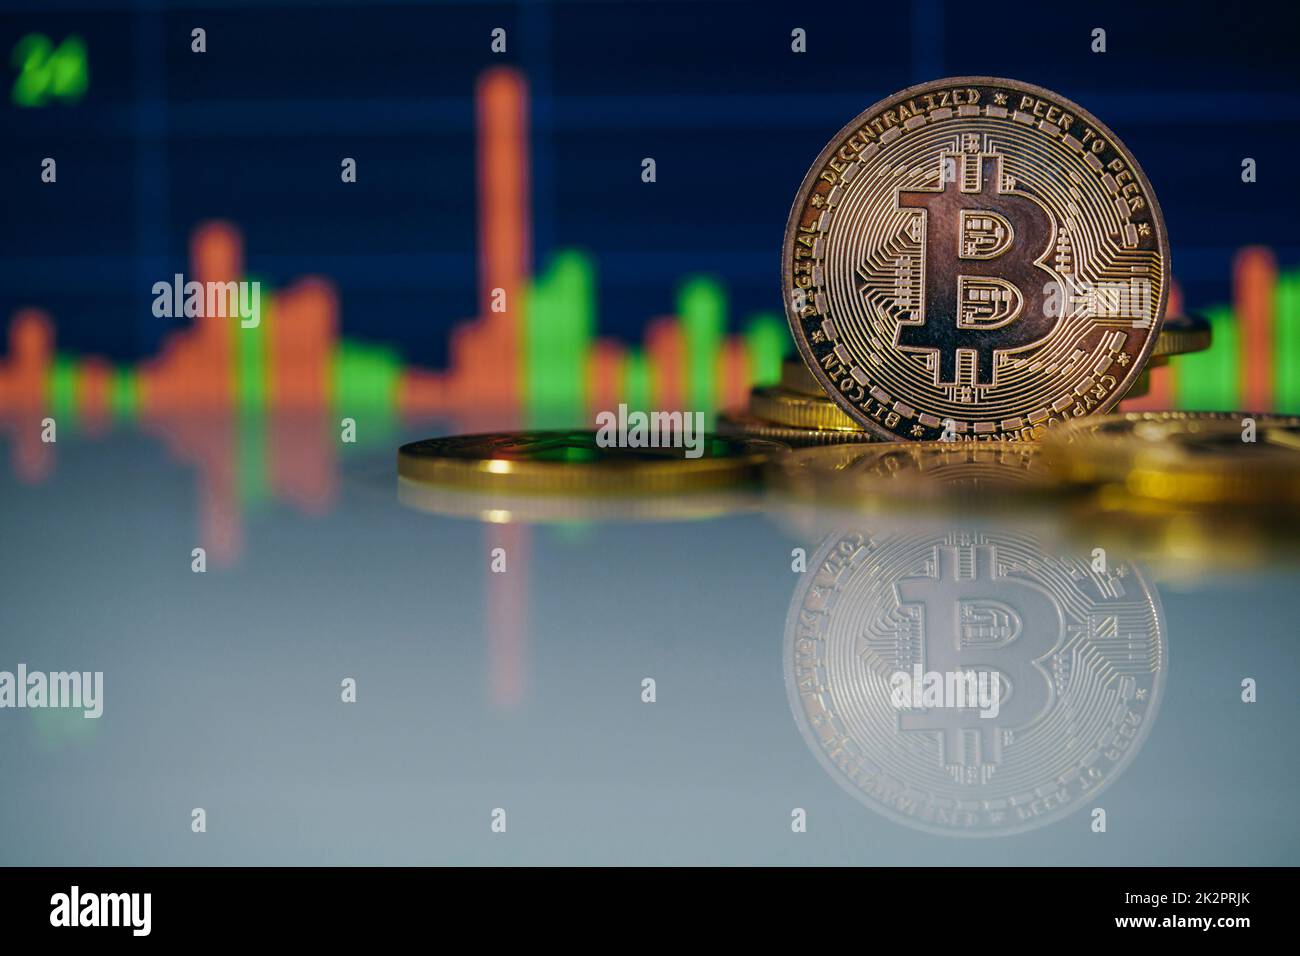 Stack or heap of gold Bitcoins cryptocurrency coins with candle stick graph chart and digital background. Stock Photo